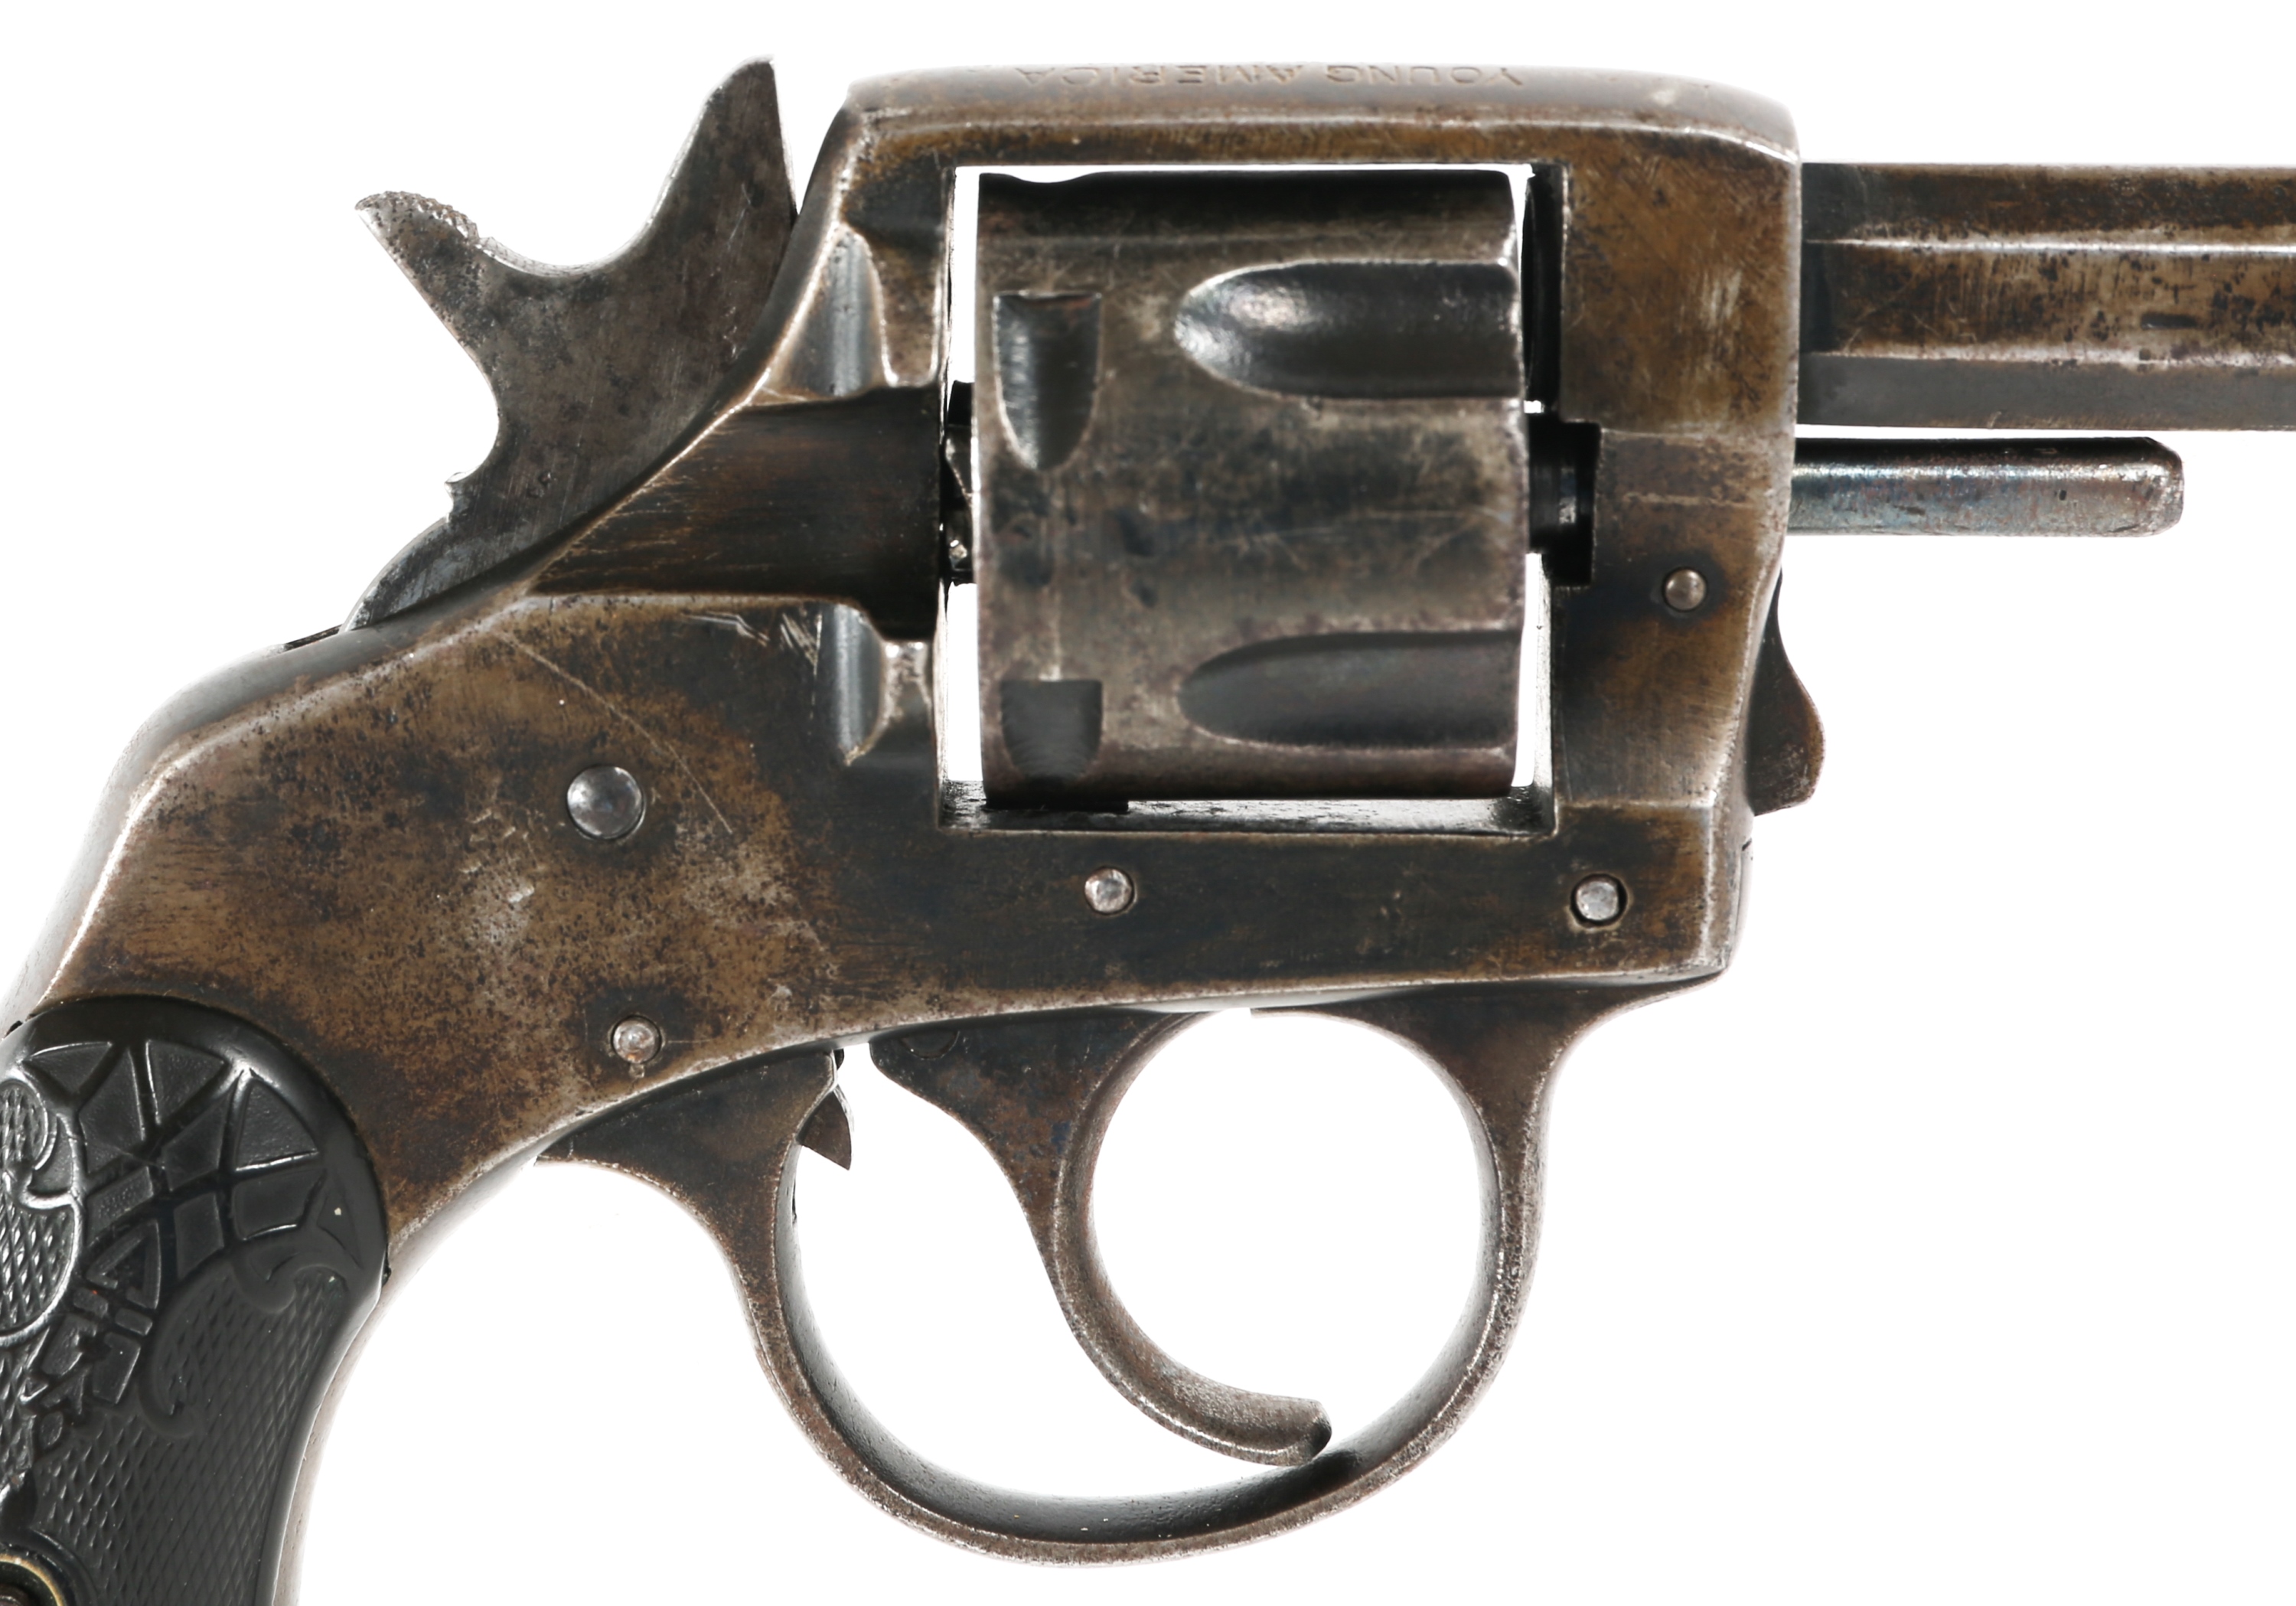 Sold at Auction: H&R Arms Young American Double Action Cal. 32 S&W